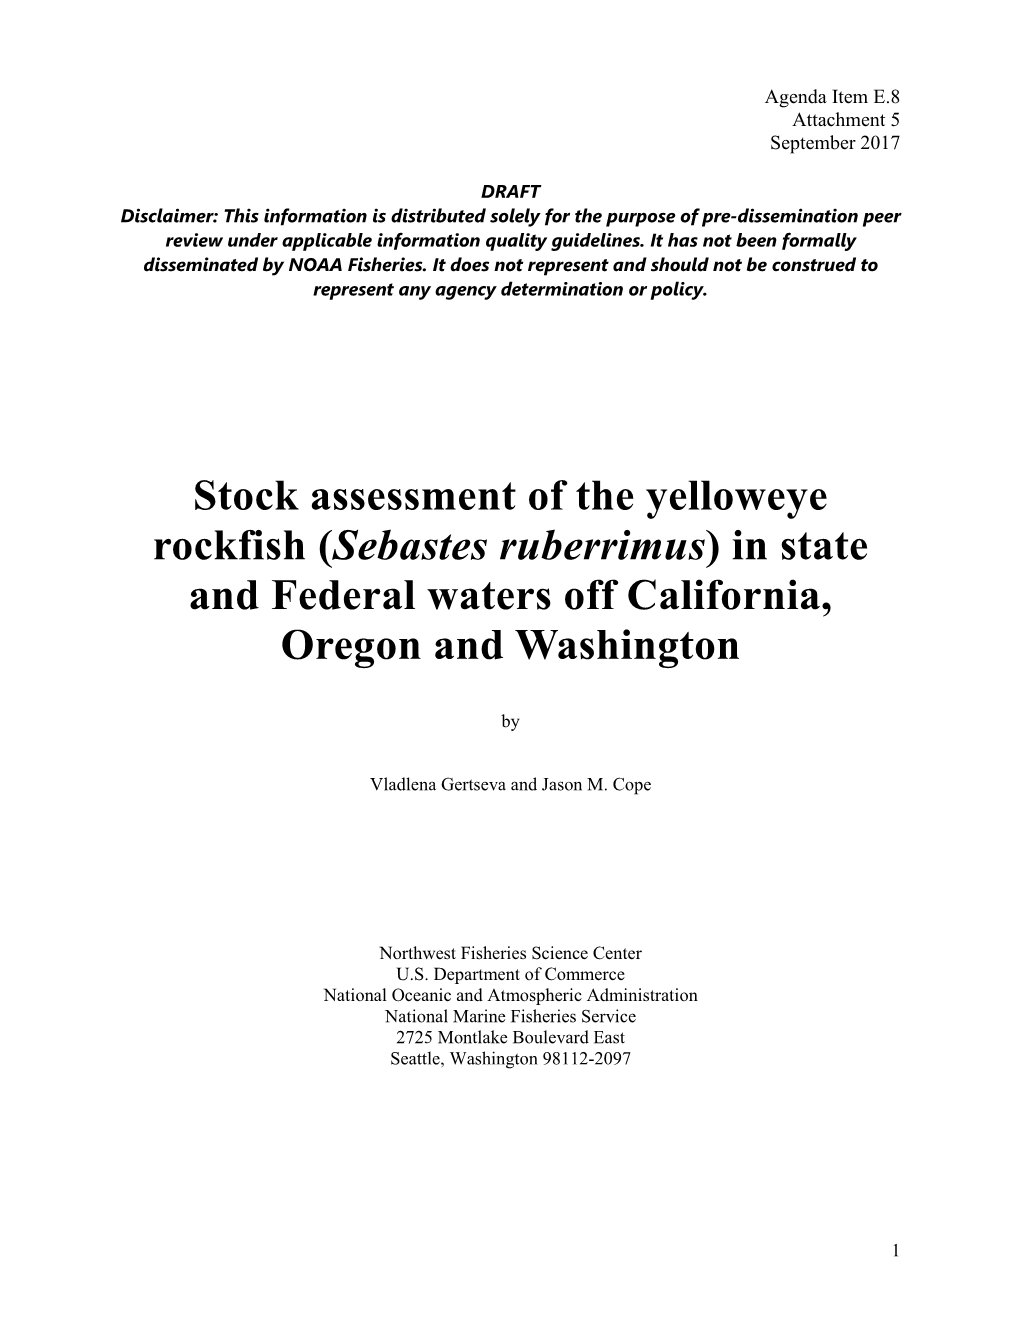 Stock Assessment of the Yelloweye Rockfish (Sebastes Ruberrimus) in State and Federal Waters Off California, Oregon and Washington